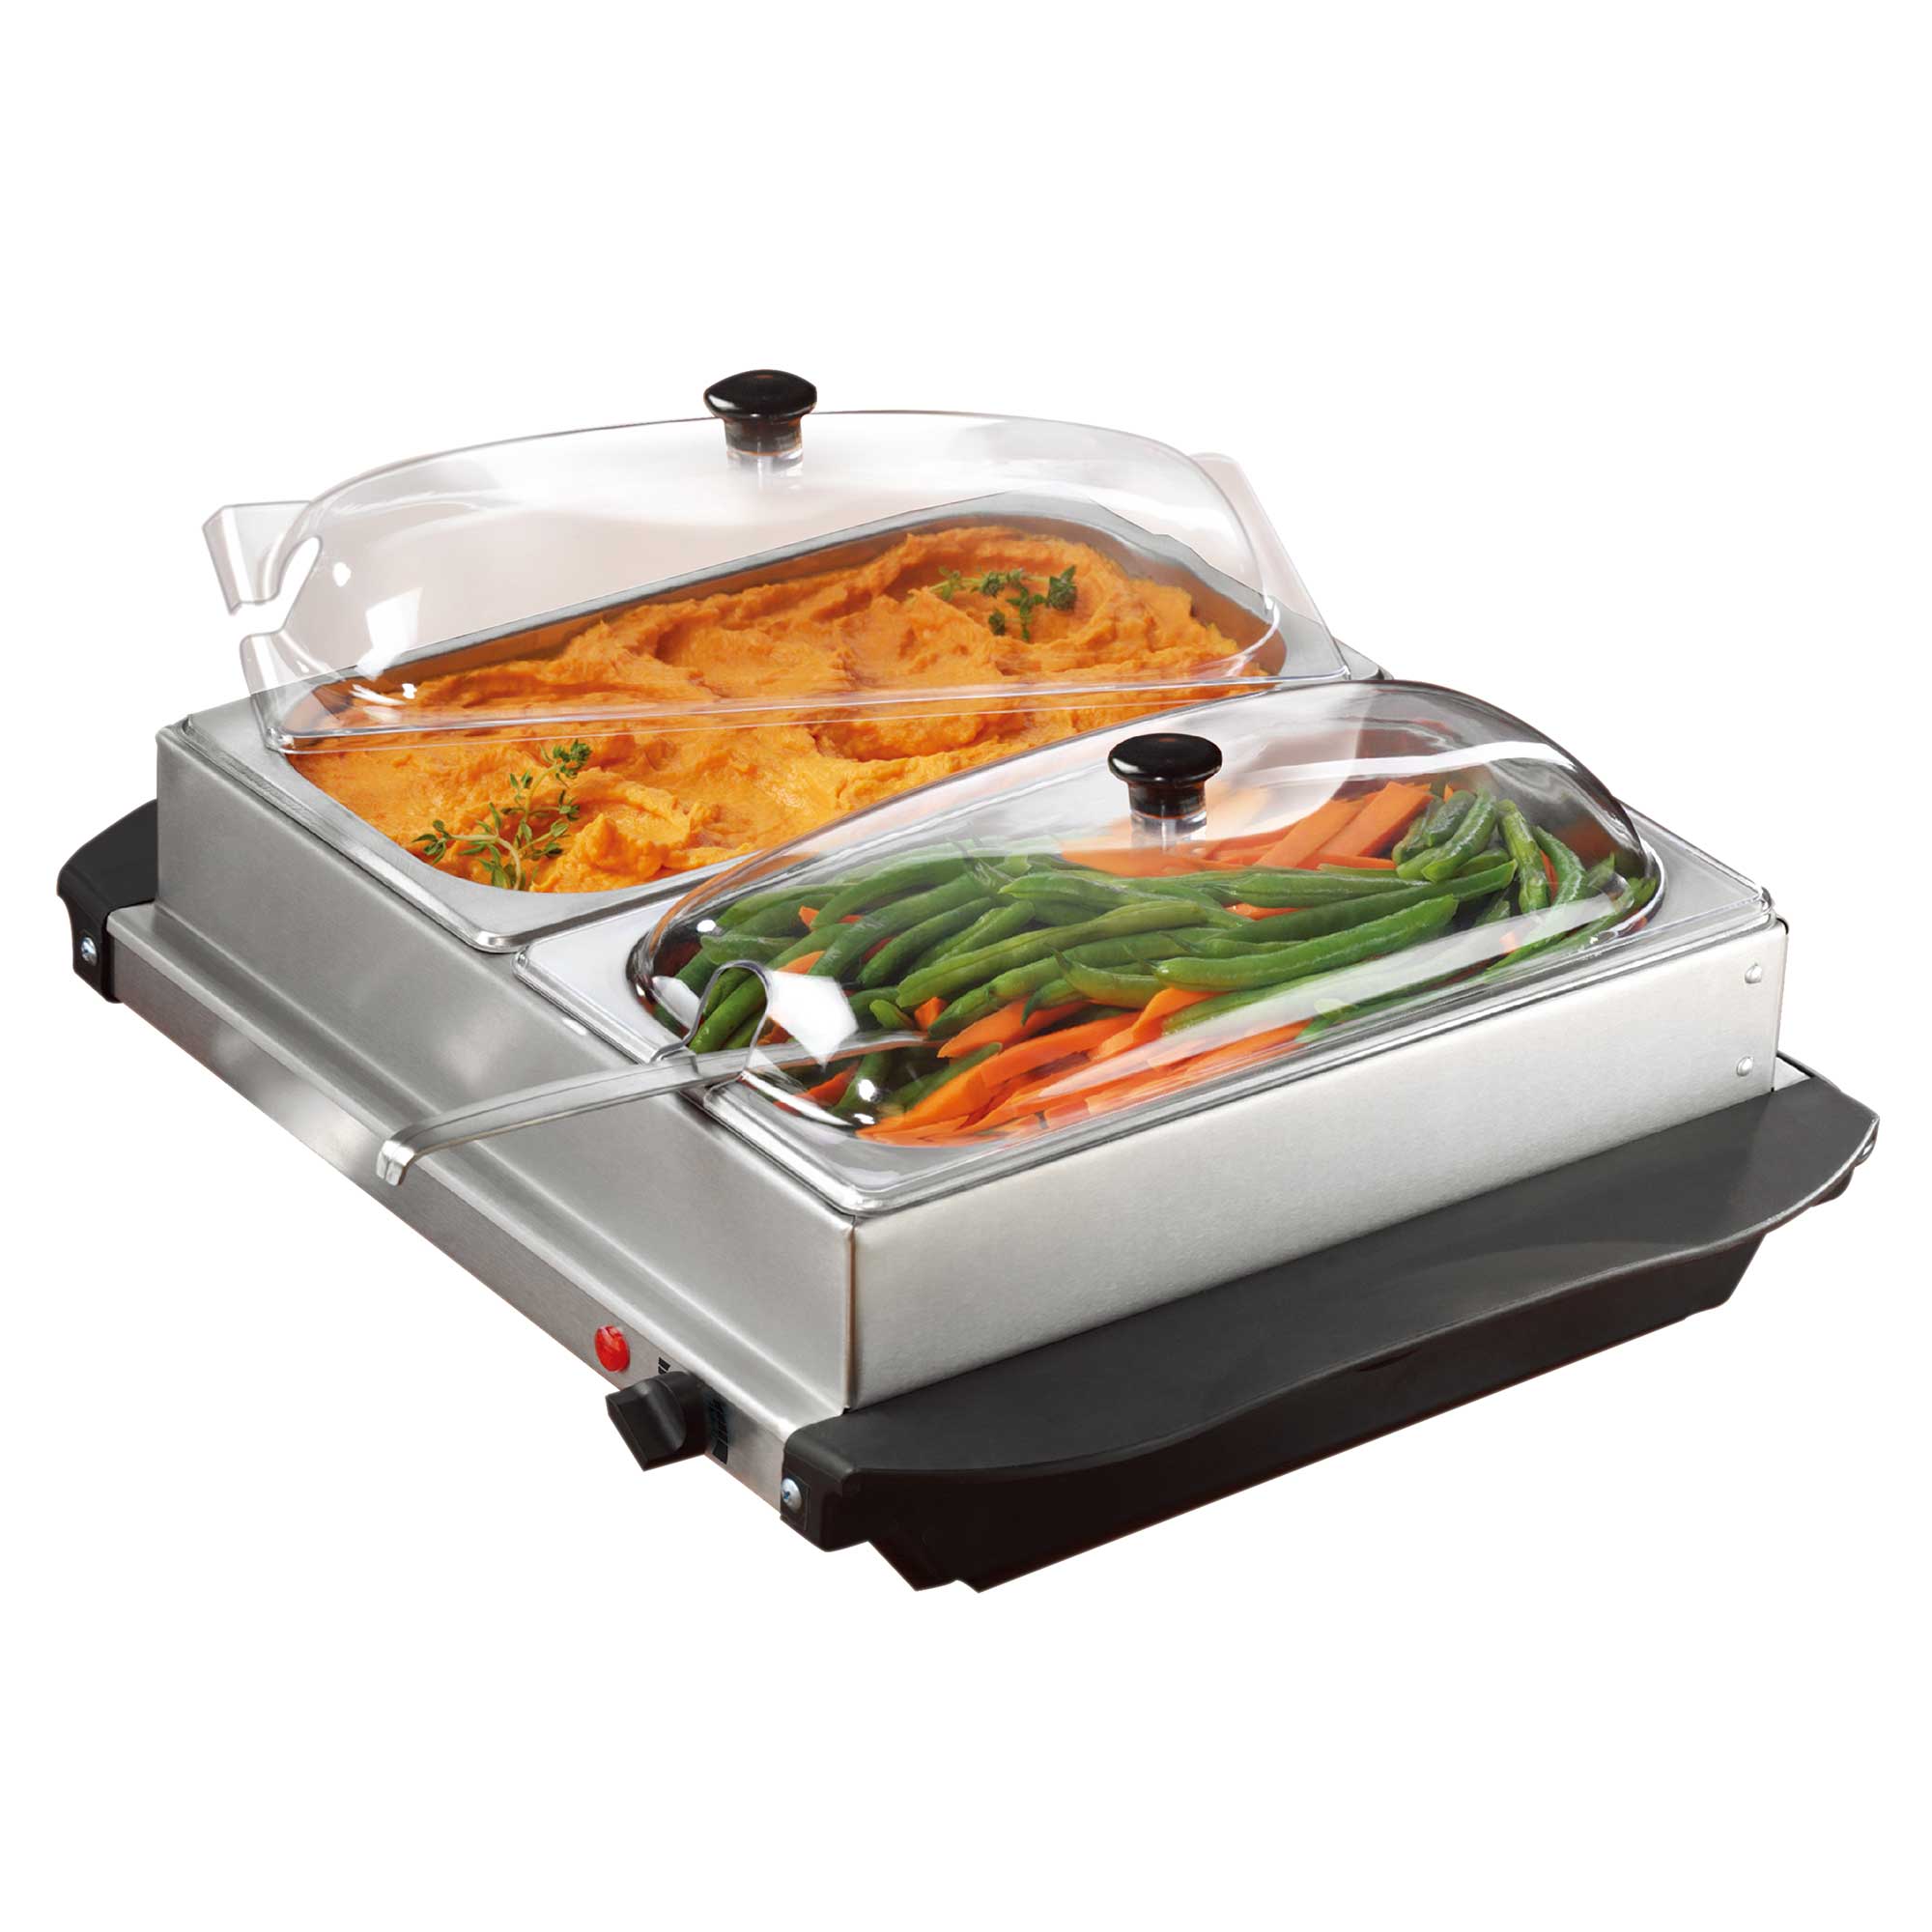 Eurolab 3 Tray Stainless Steel Buffet Service Warmer with